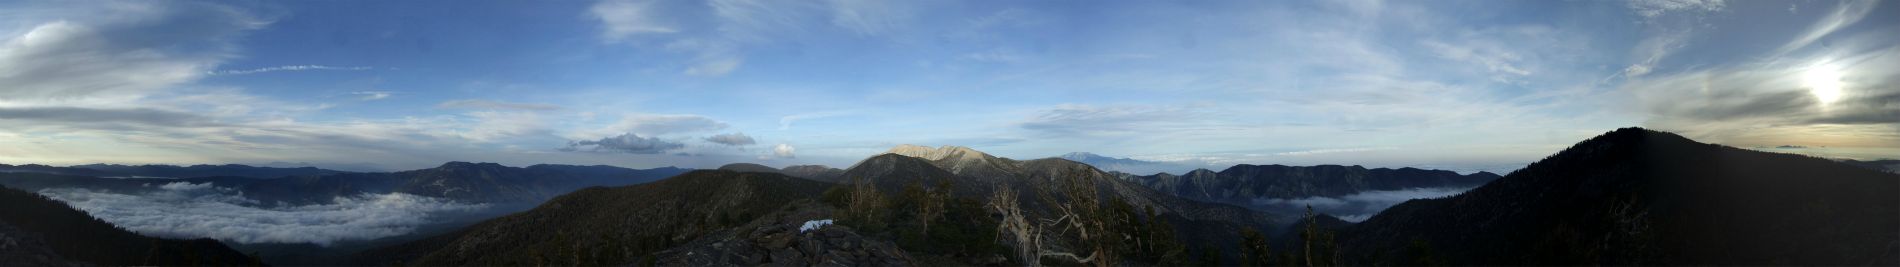 360 degree view from Shields Peak (10,680 ft).  The pic here doesn't do it justice... right-click and open the image in a new window and it will be like you're there!